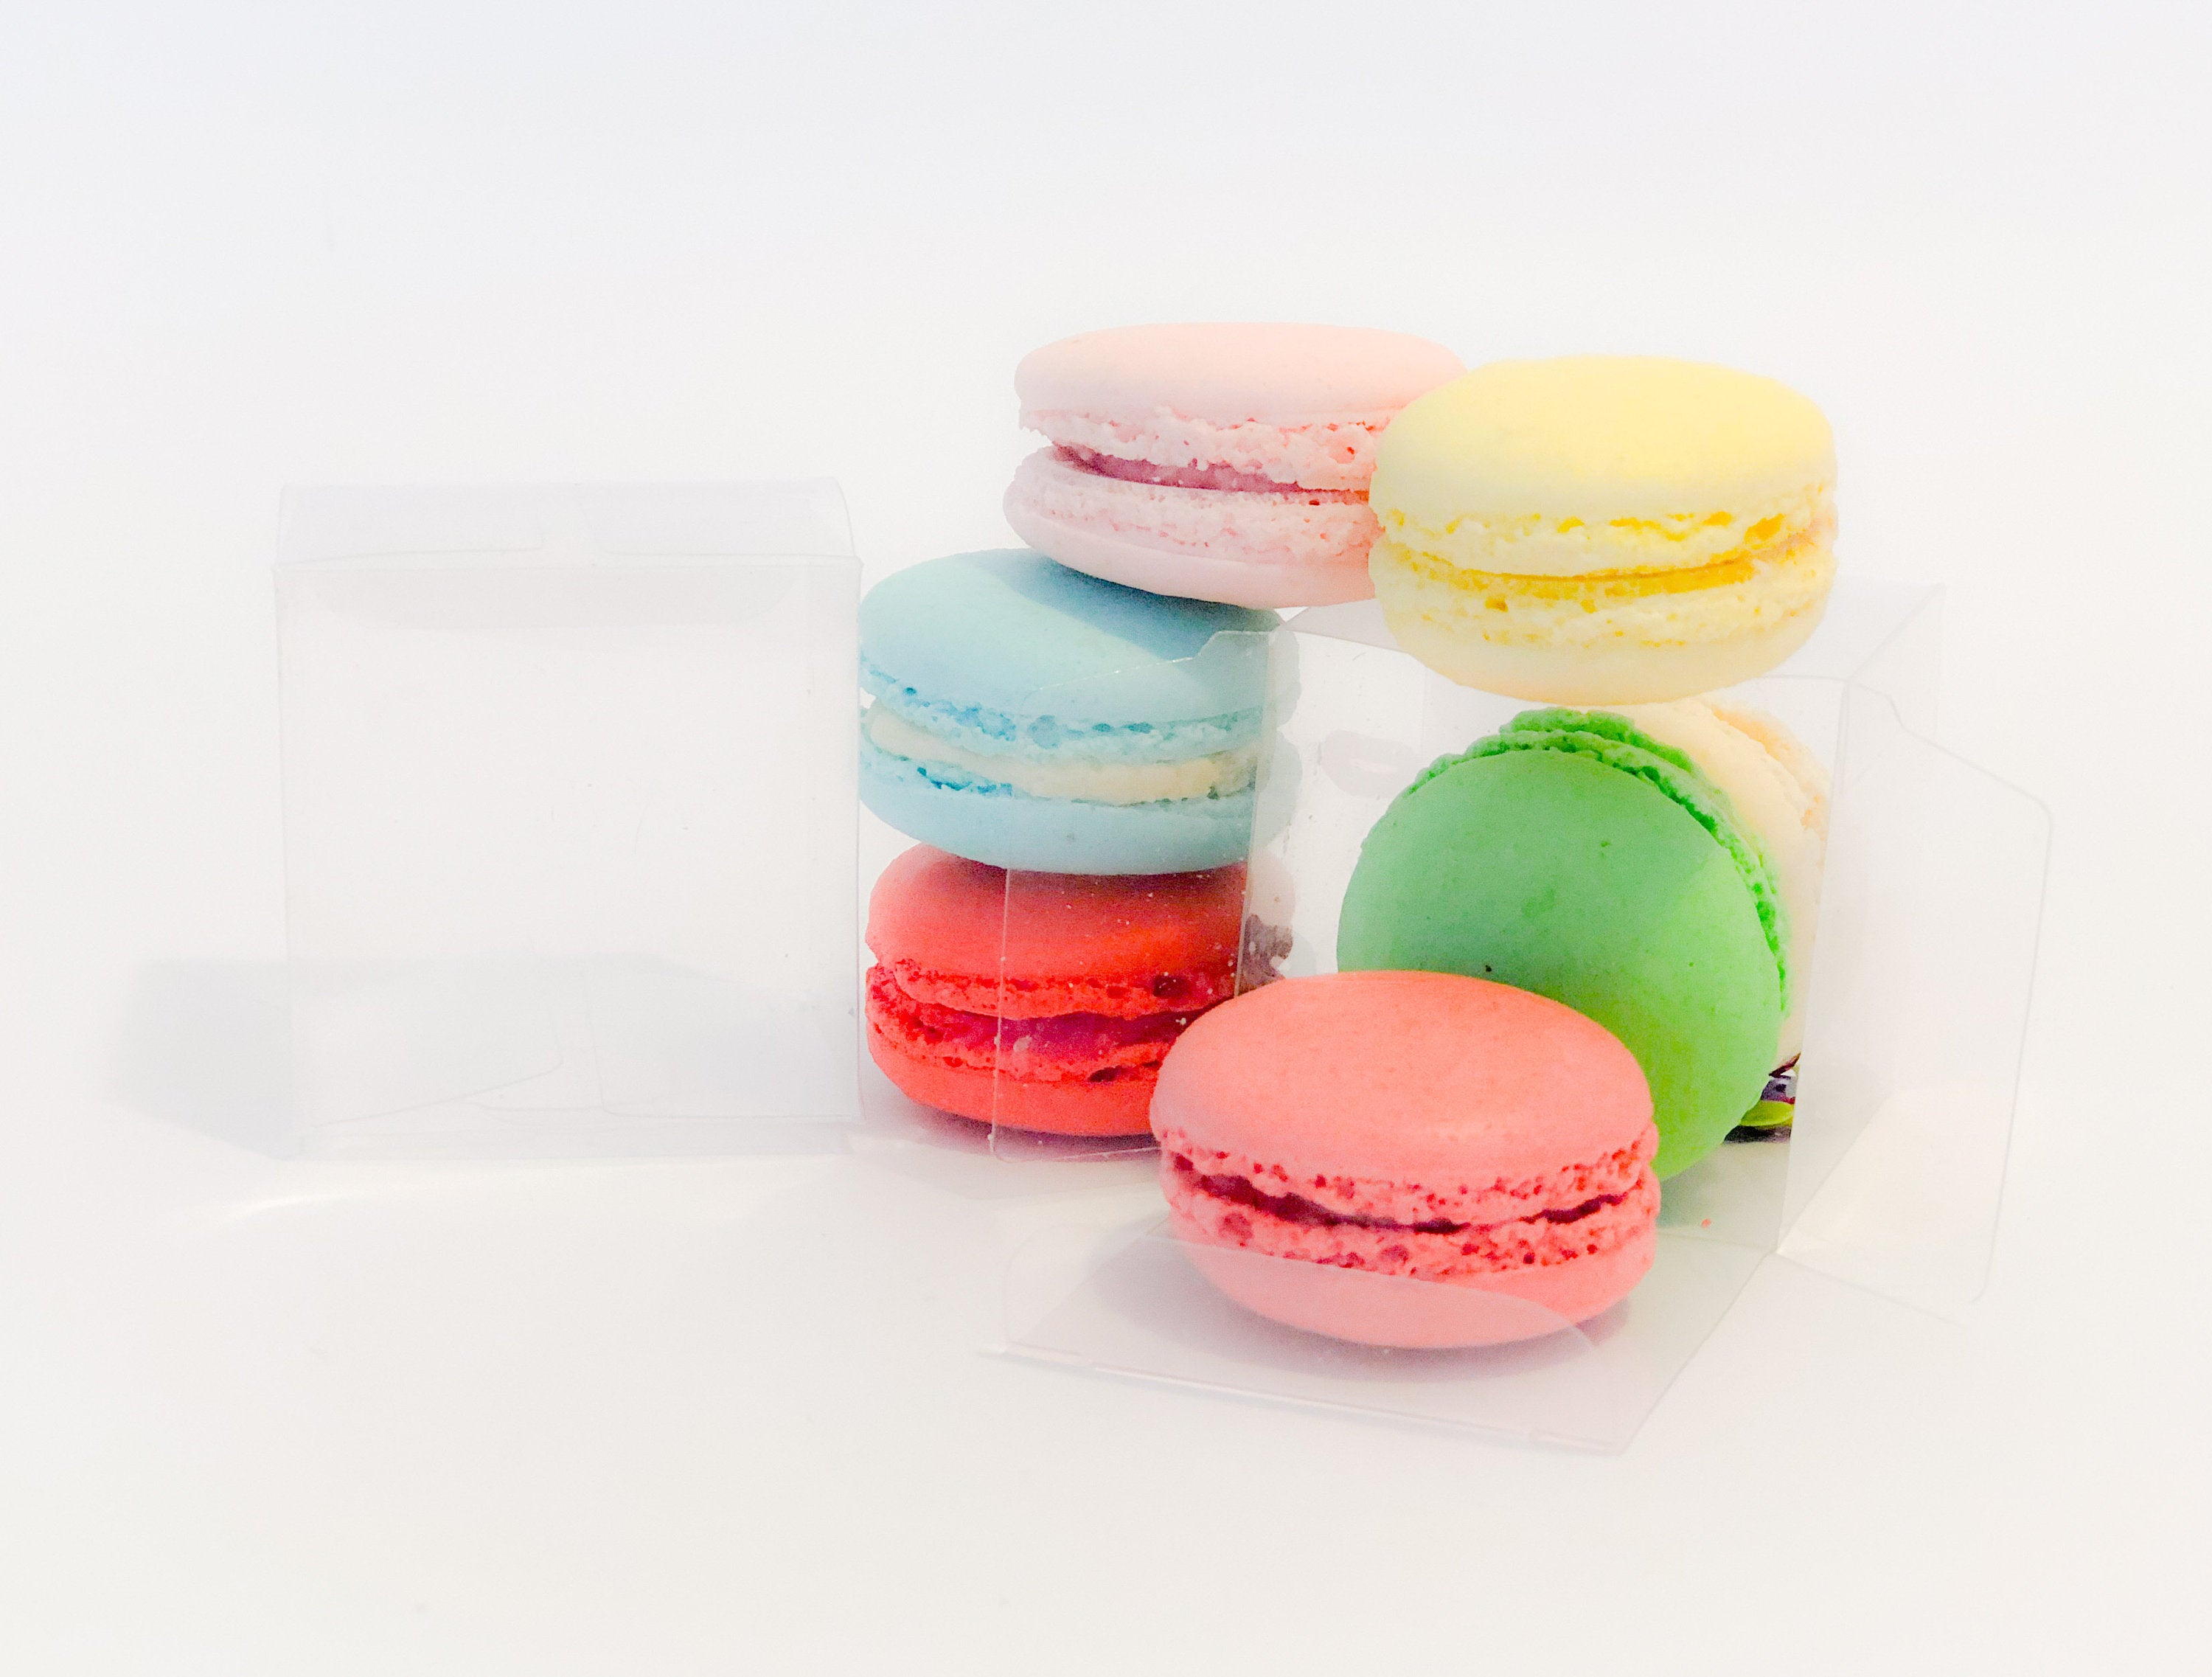 Clear Plastic Small Macaron Boxes